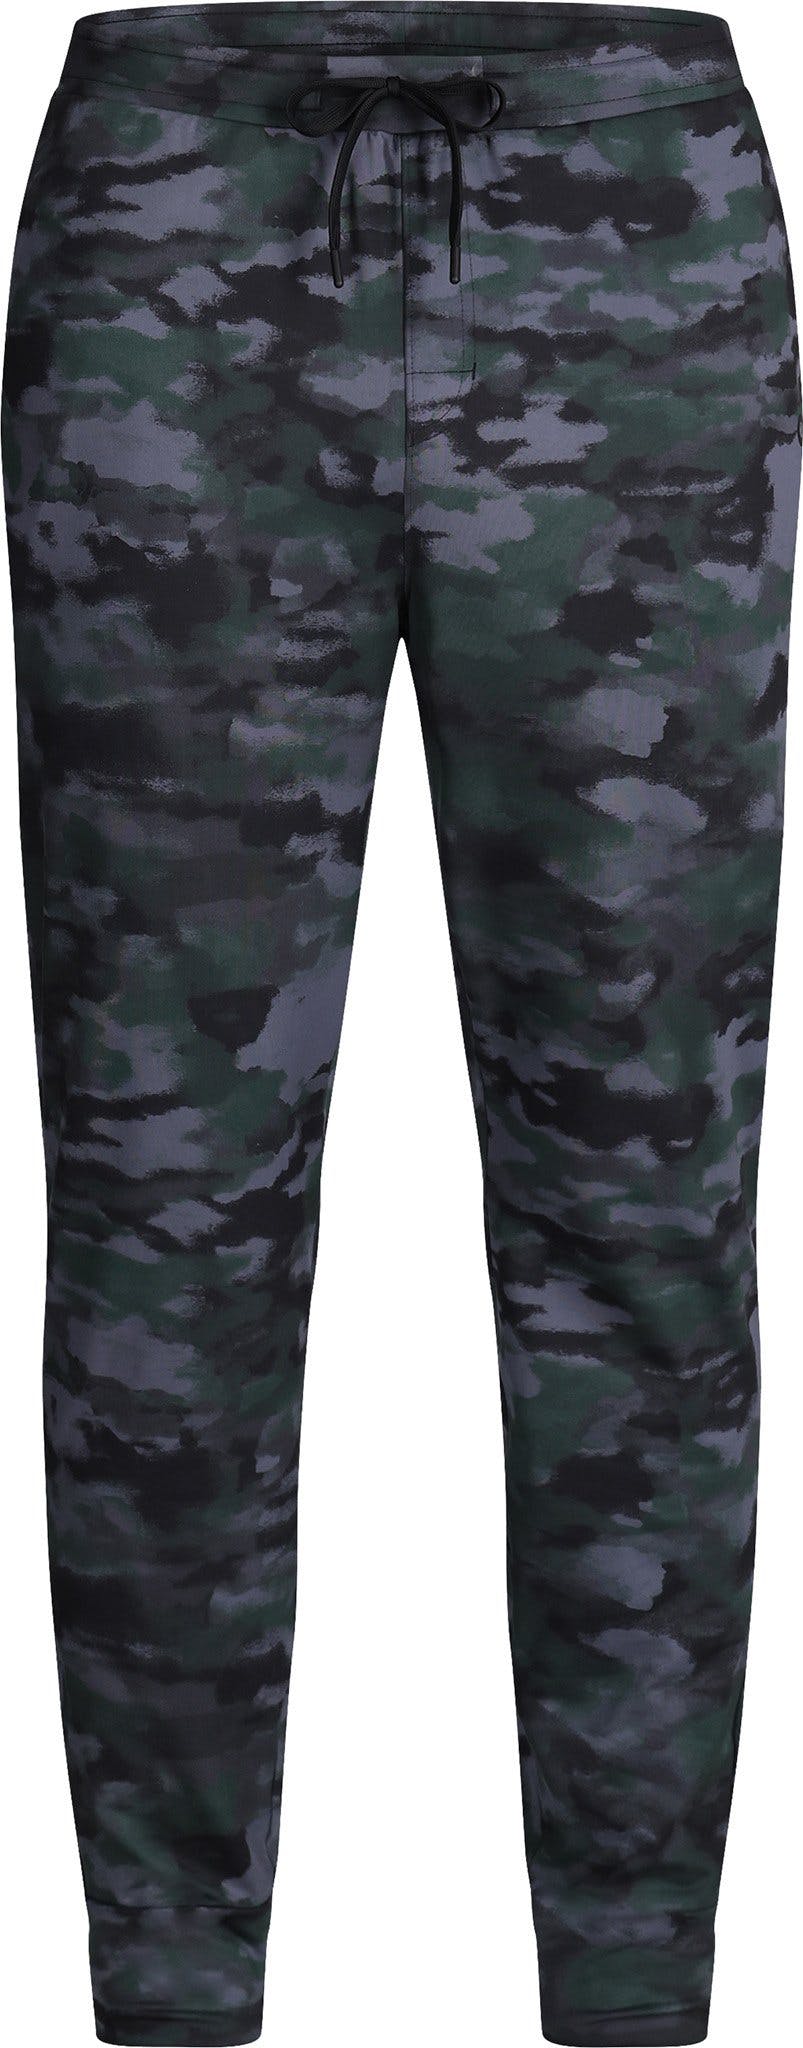 Product image for Baritone Joggers - Men's